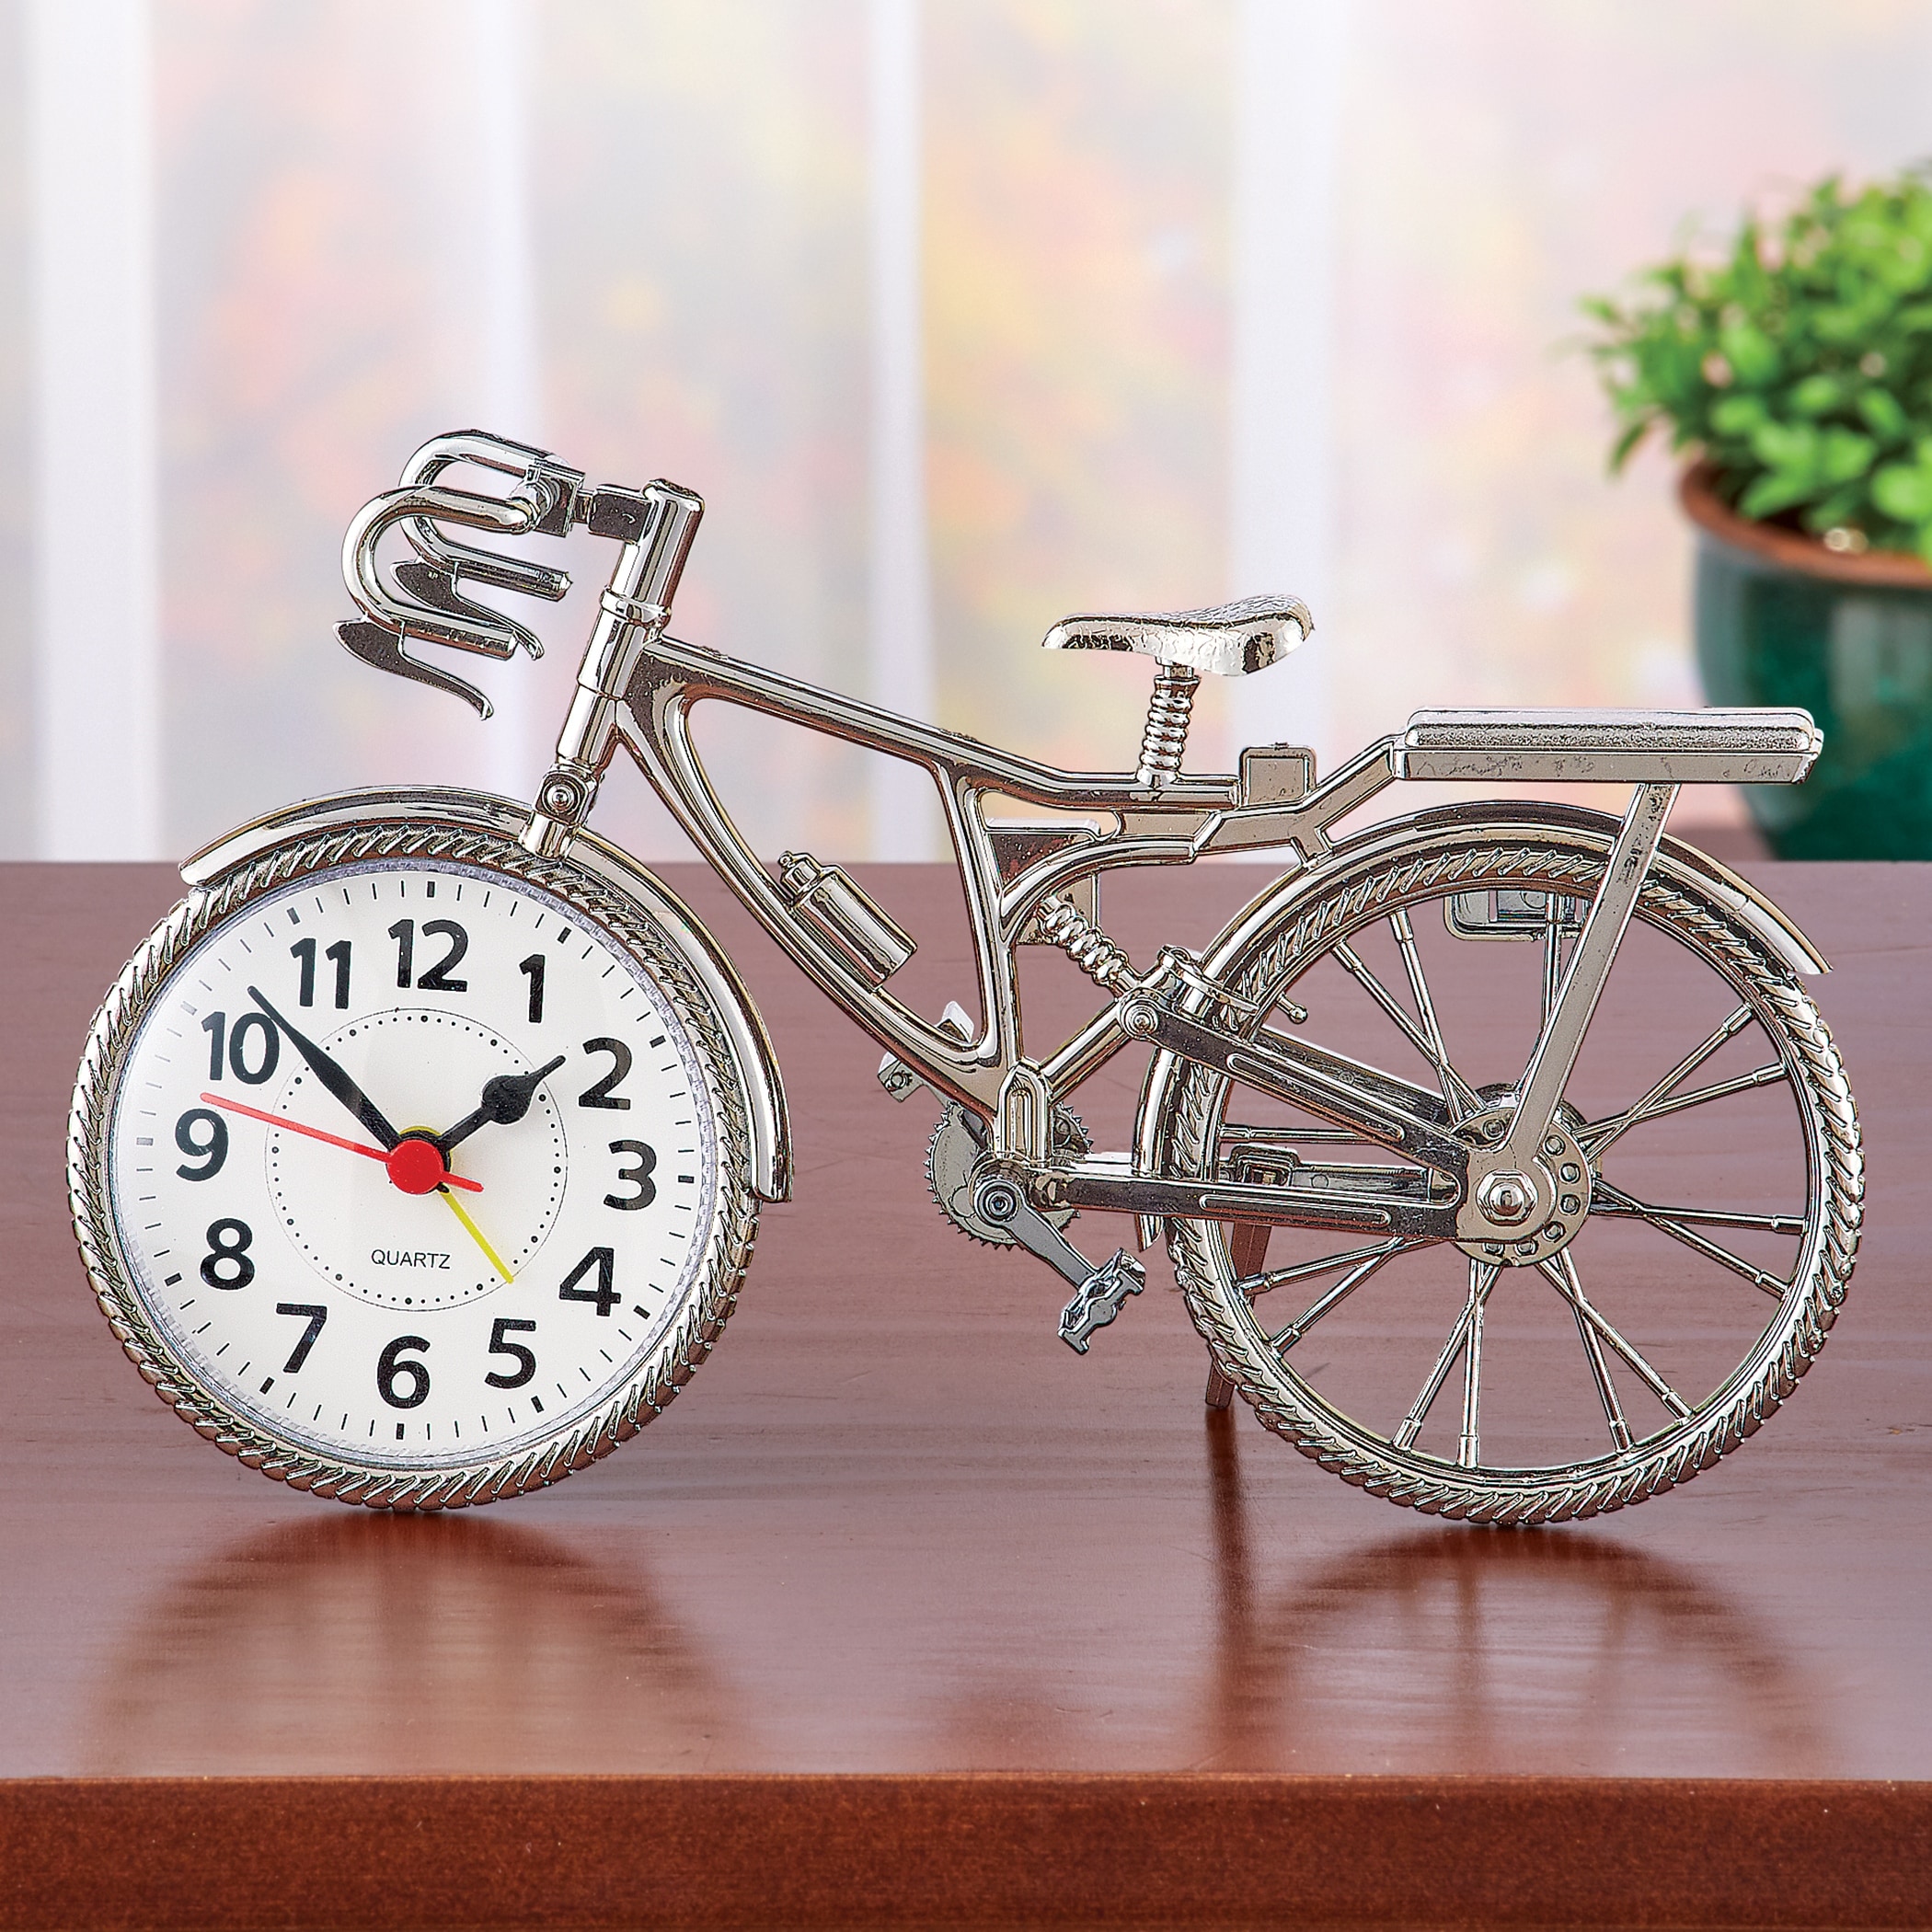 Silver-Toned Chrome Finish Tabletop Bicycle Clock ...